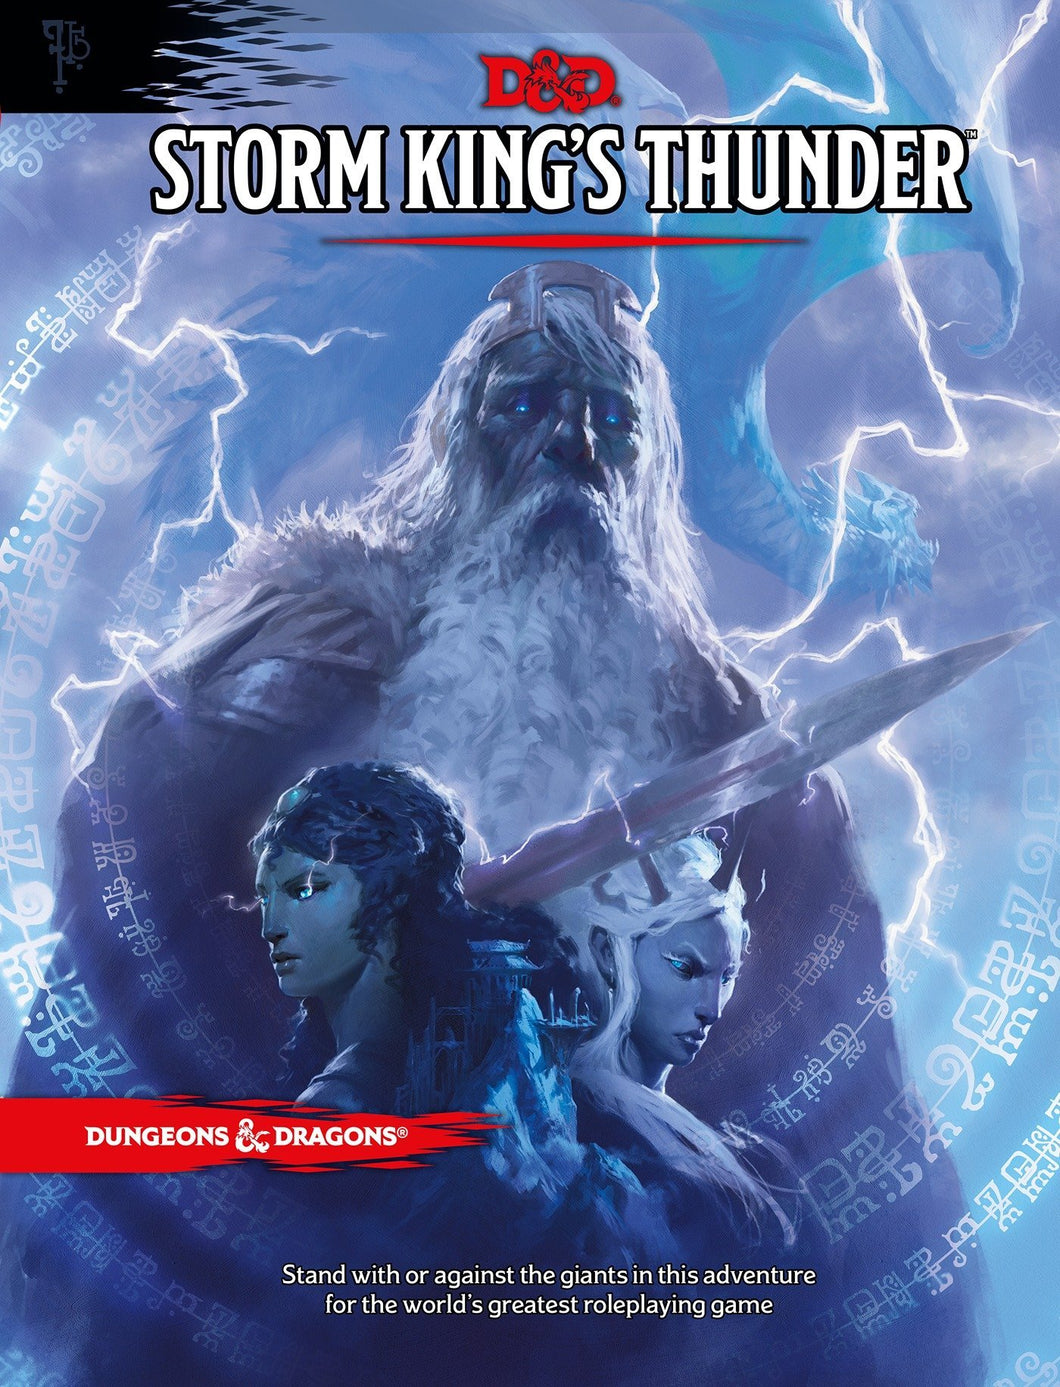 D&D Dungeon Storm Kings Thunder